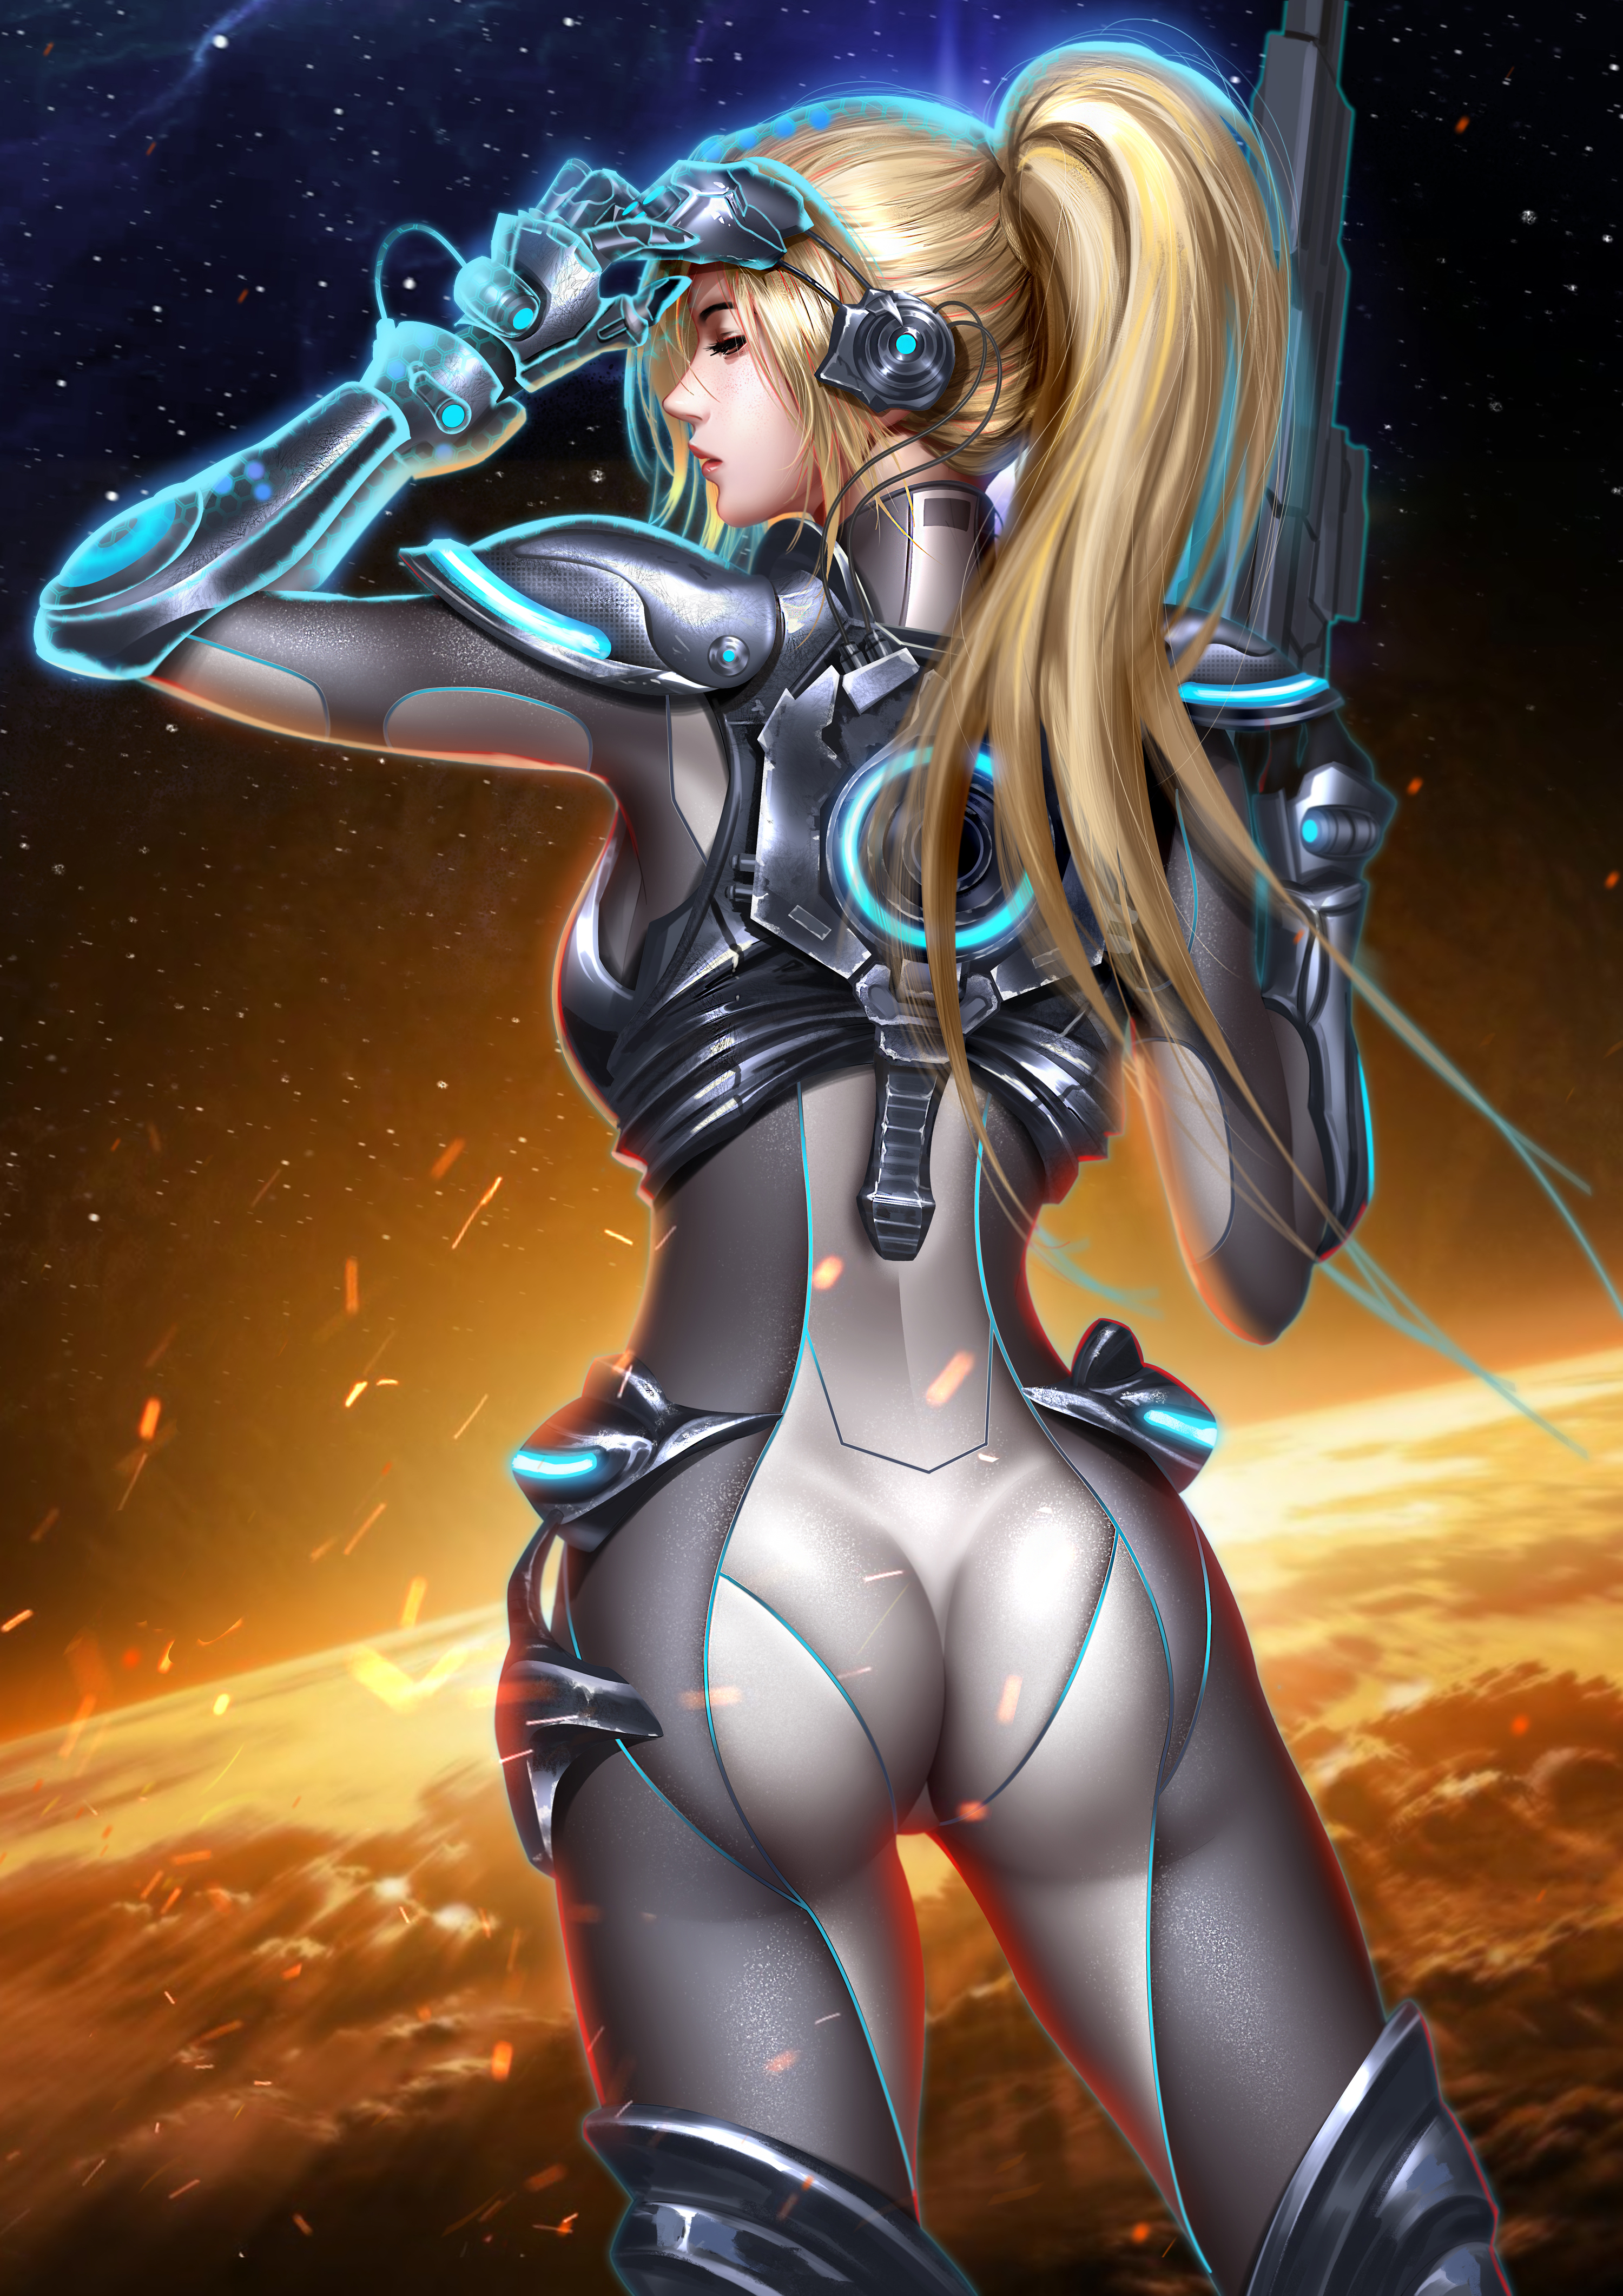 General 3000x4243 Nova (Starcraft) StarCraft video games video game girls blonde long hair ponytail profile armor behind spacesuit space stars sparks glowing weapon portrait display video game characters artwork drawing digital art illustration fan art Jason Liang ass tight clothing